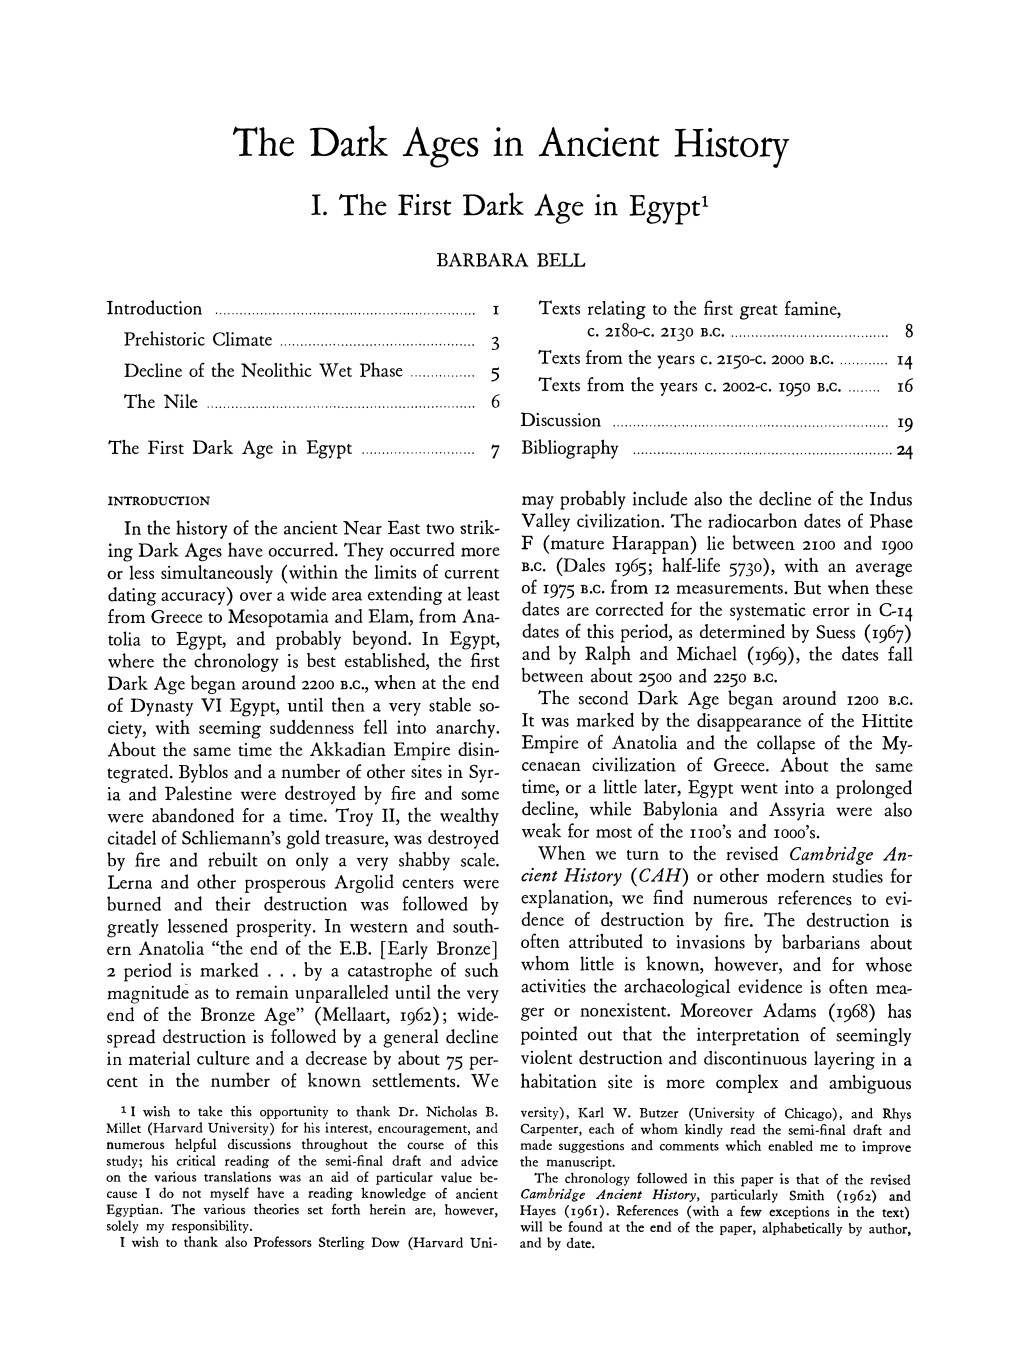 The Dark Ages in Ancient History. I. the First Dark